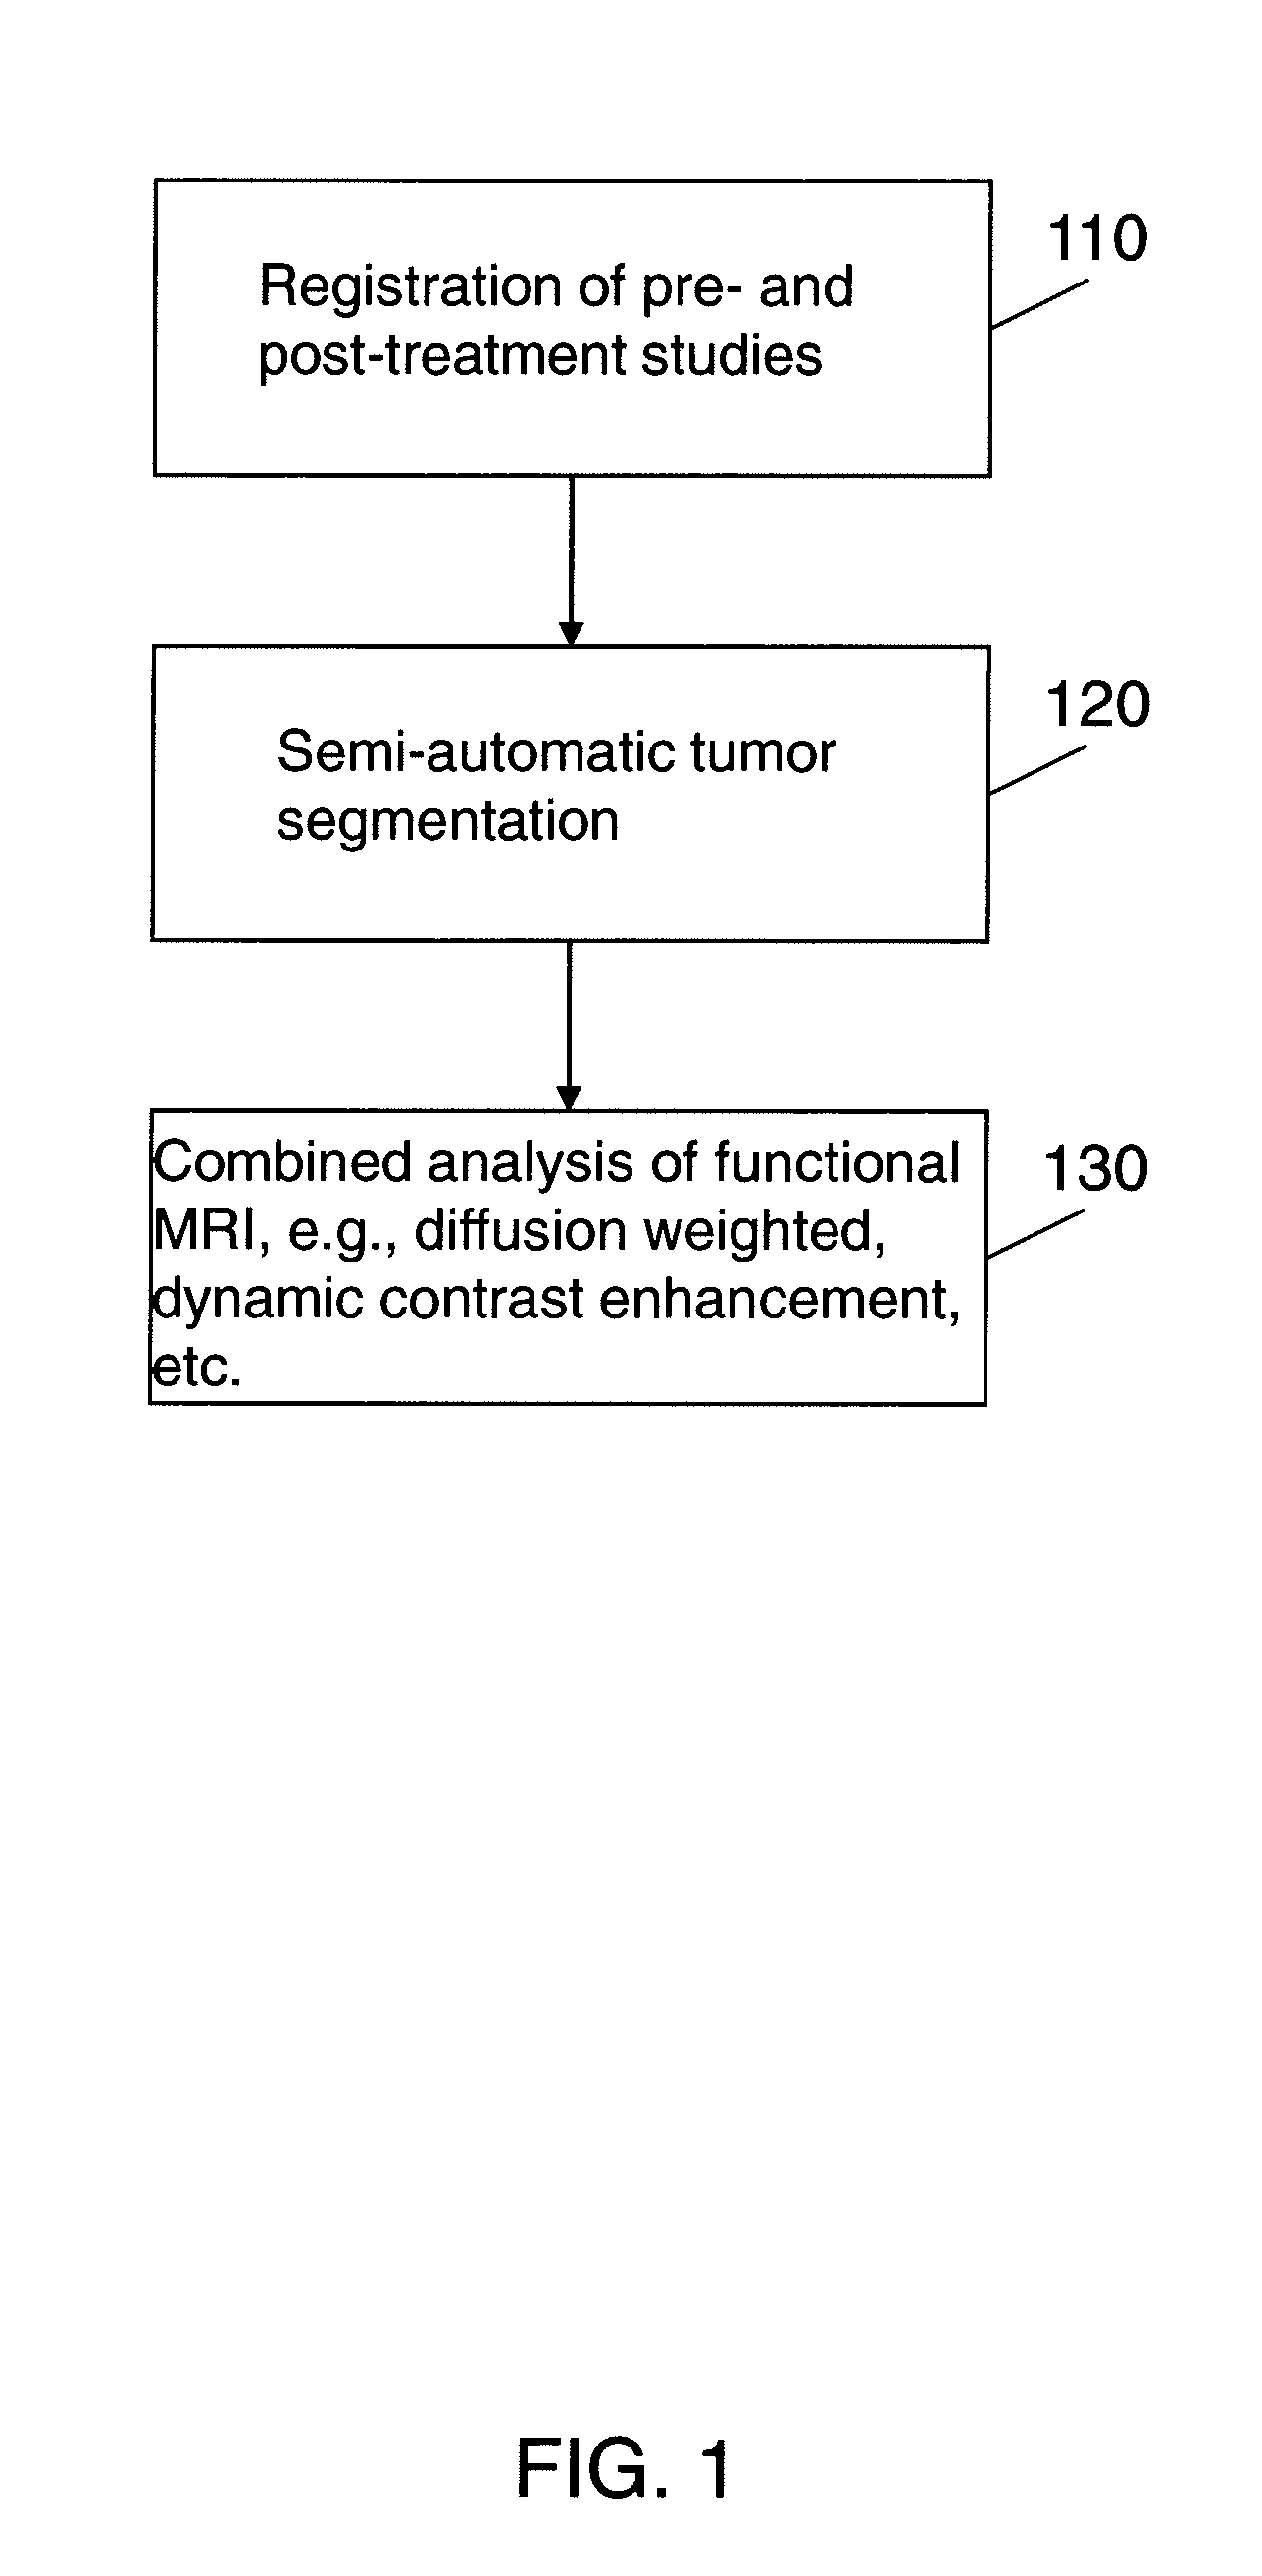 Automated method for assessment of tumor response to therapy with multi-parametric MRI